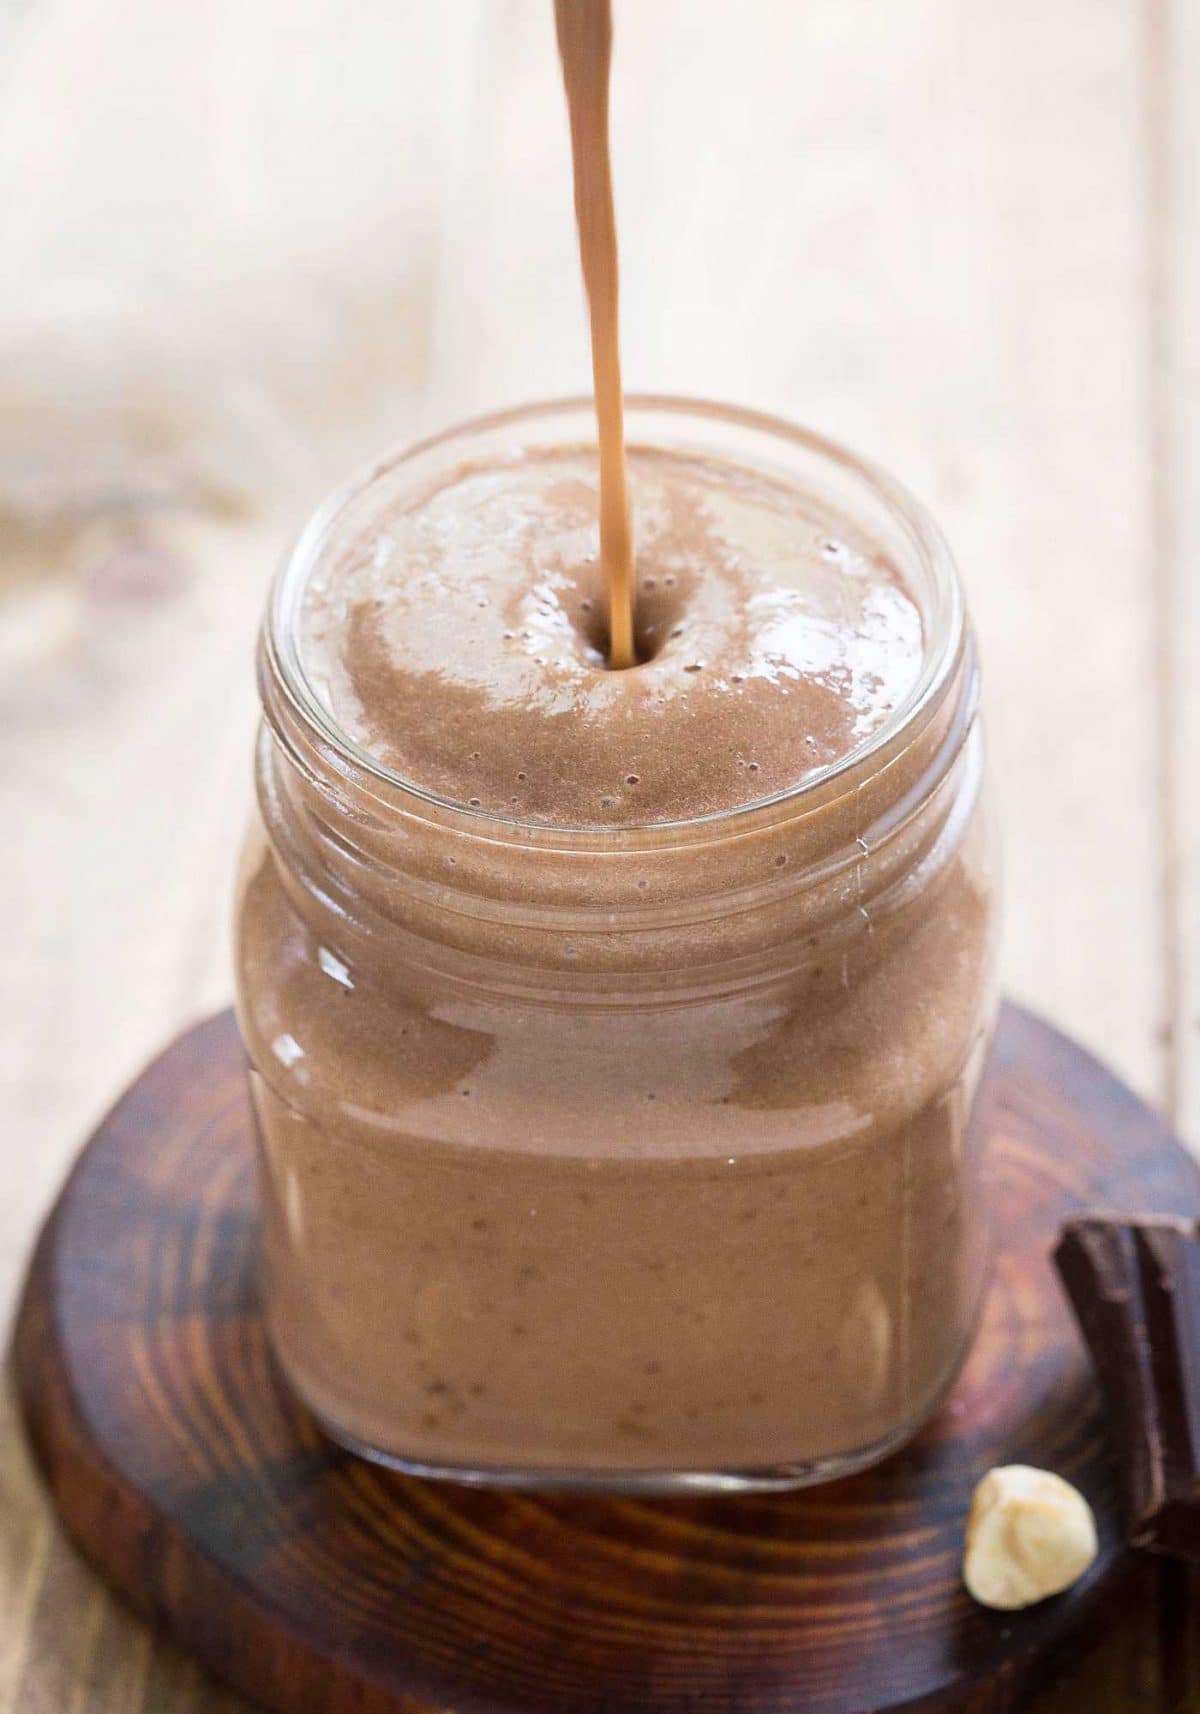 Thick and creamy banana chocolate smoothie. Nutritious and naturally sweetened.